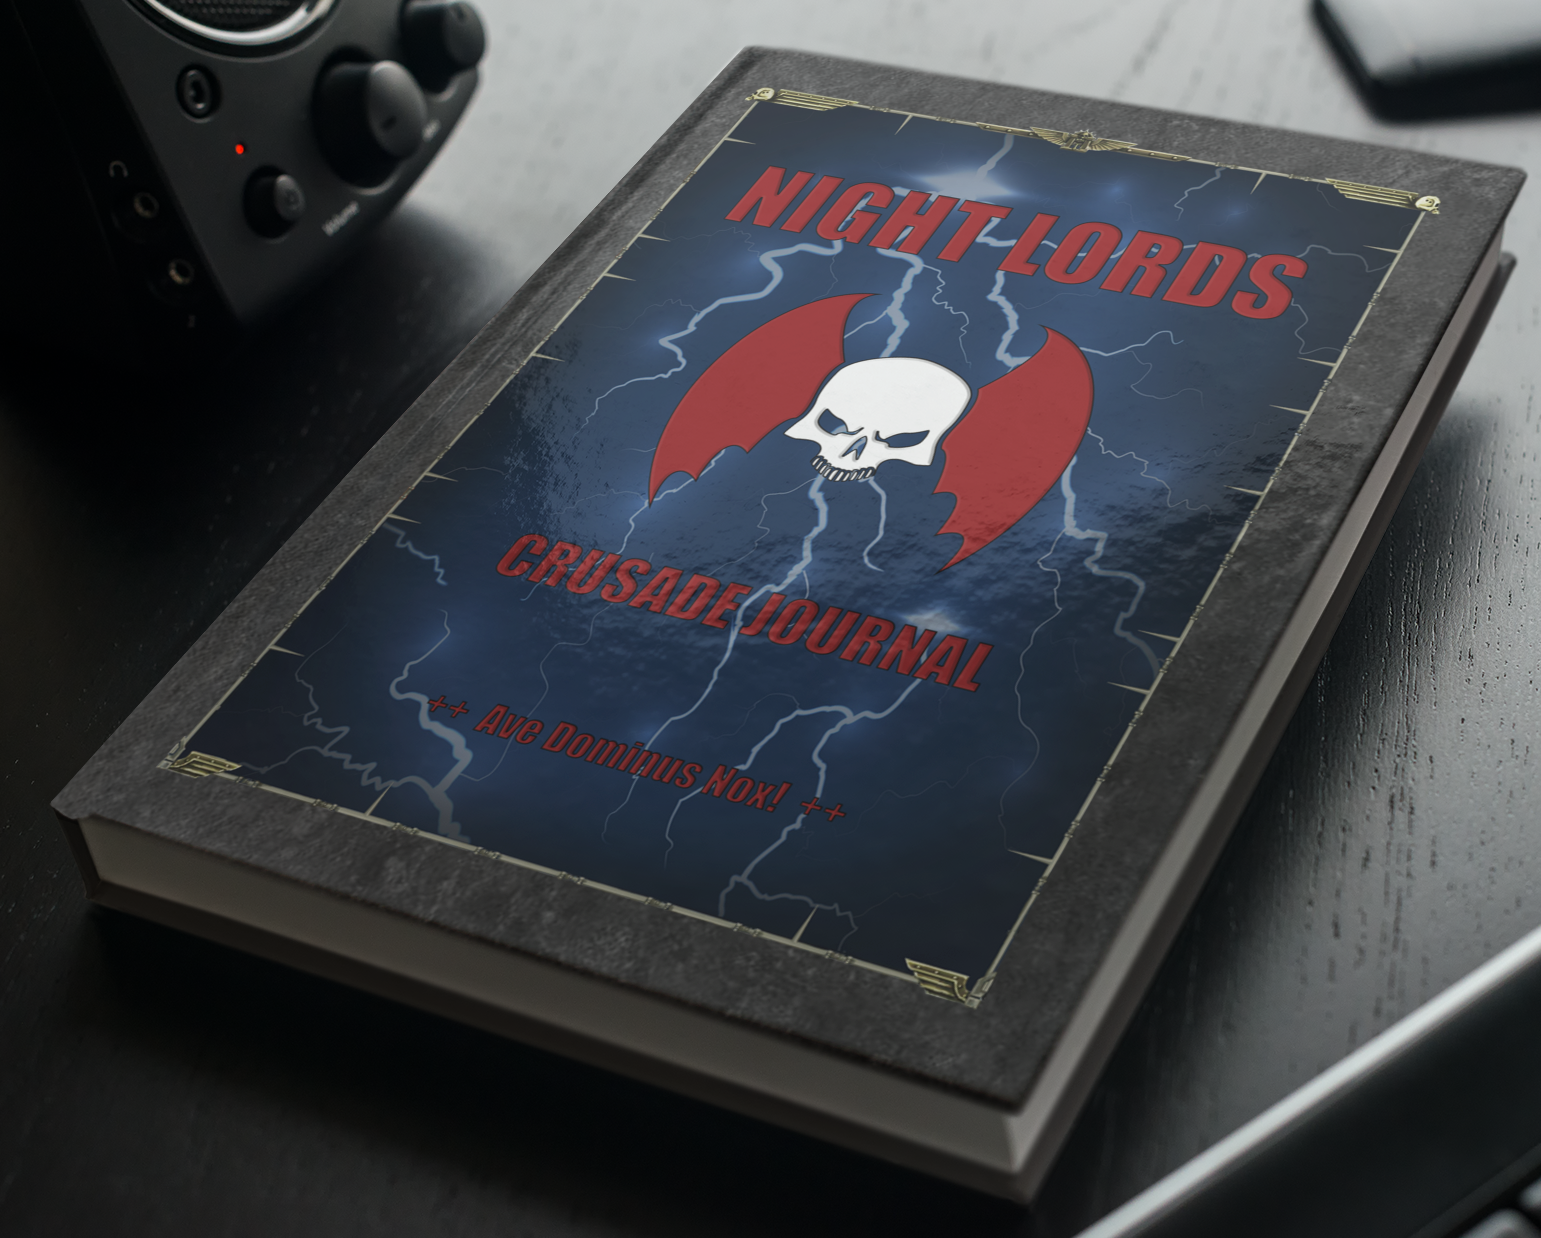 Night Lords | Crusade Journal | WH 40K